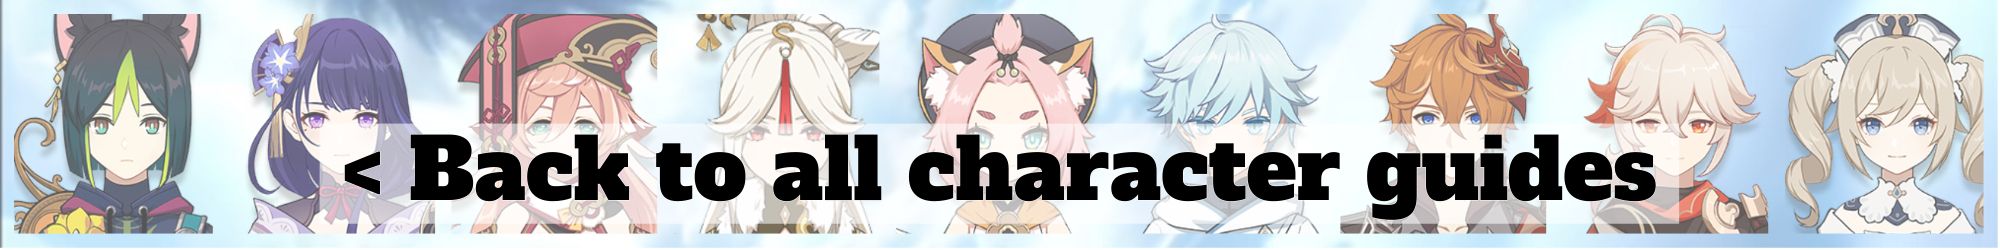 link to the character guide